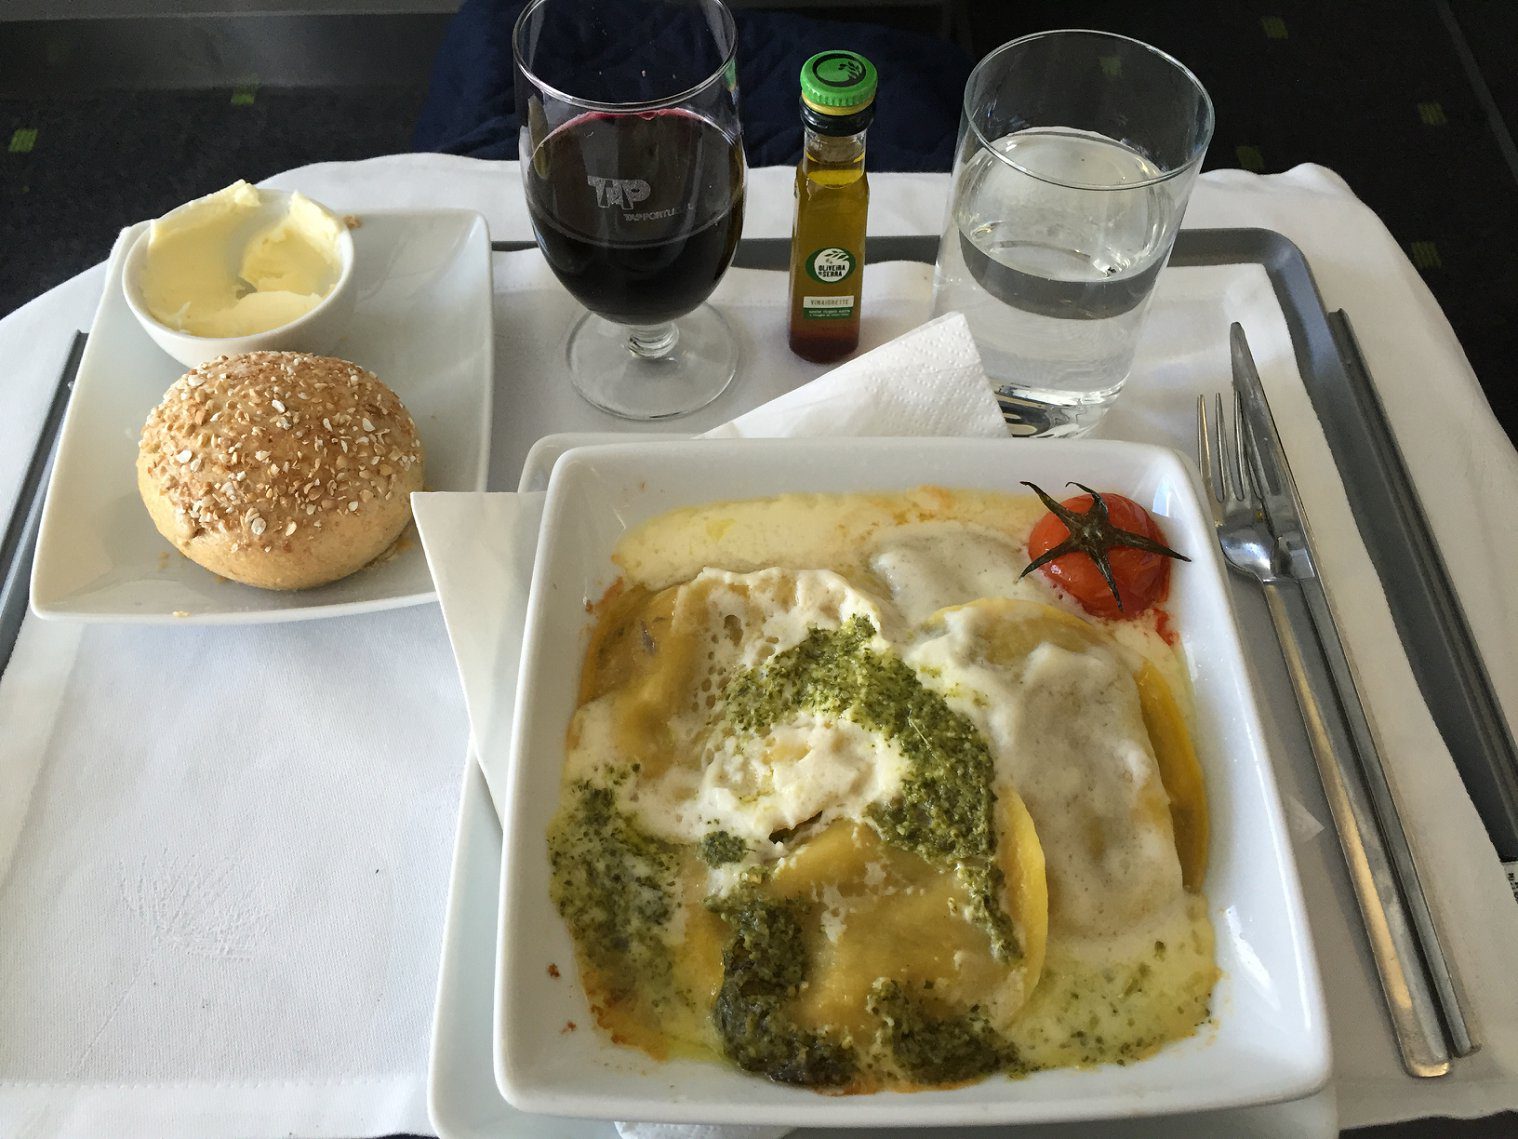 TAP Portugal Business class entree course